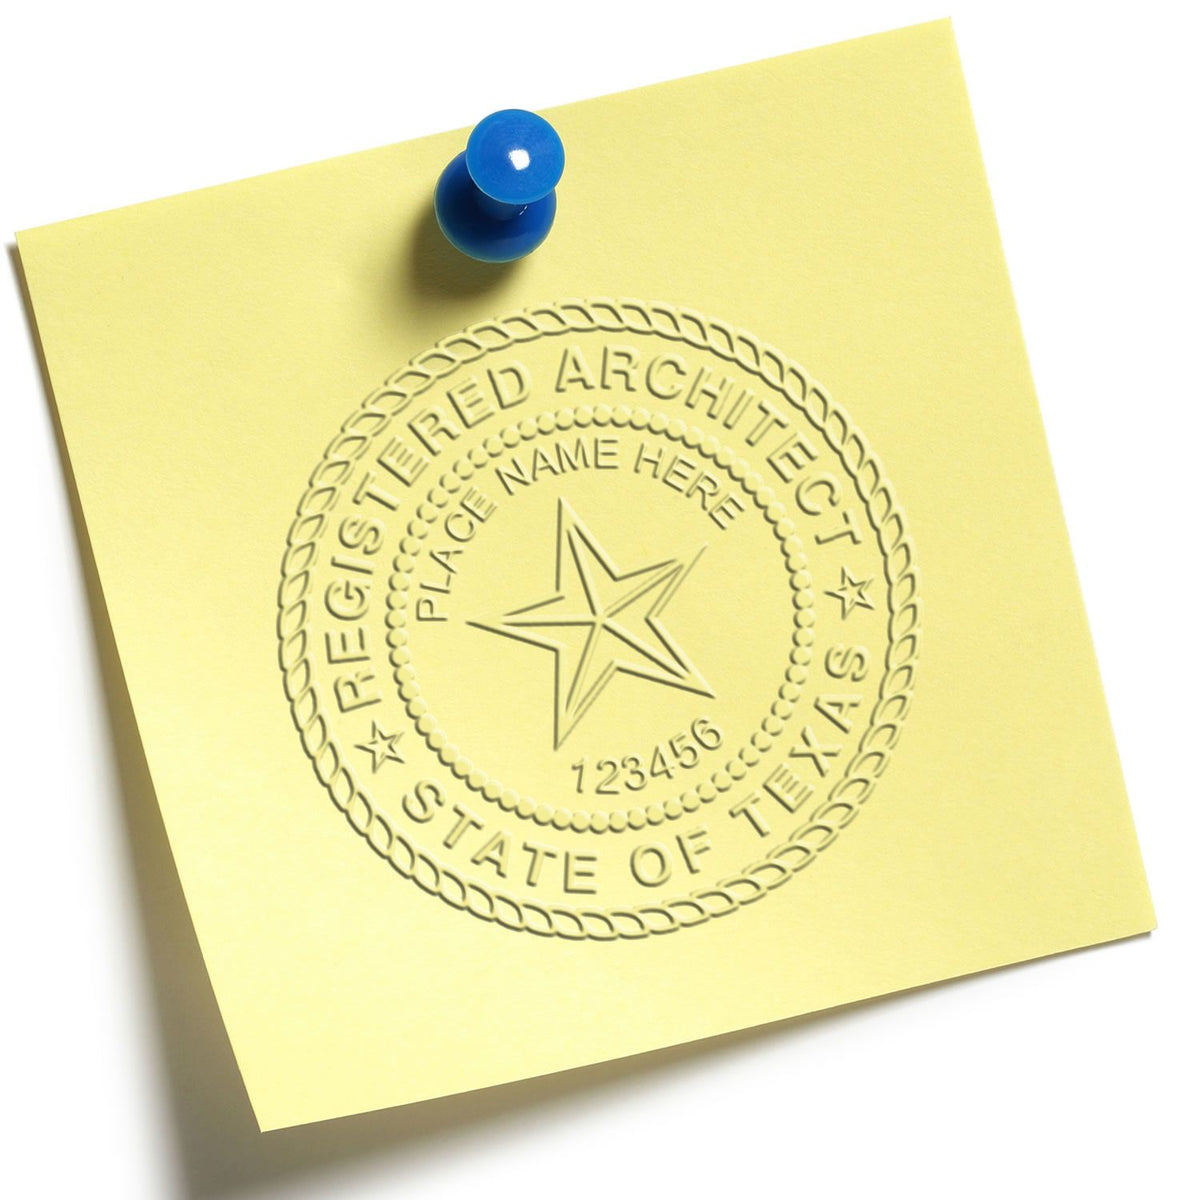 An in use photo of the Gift Texas Architect Seal showing a sample imprint on a cardstock